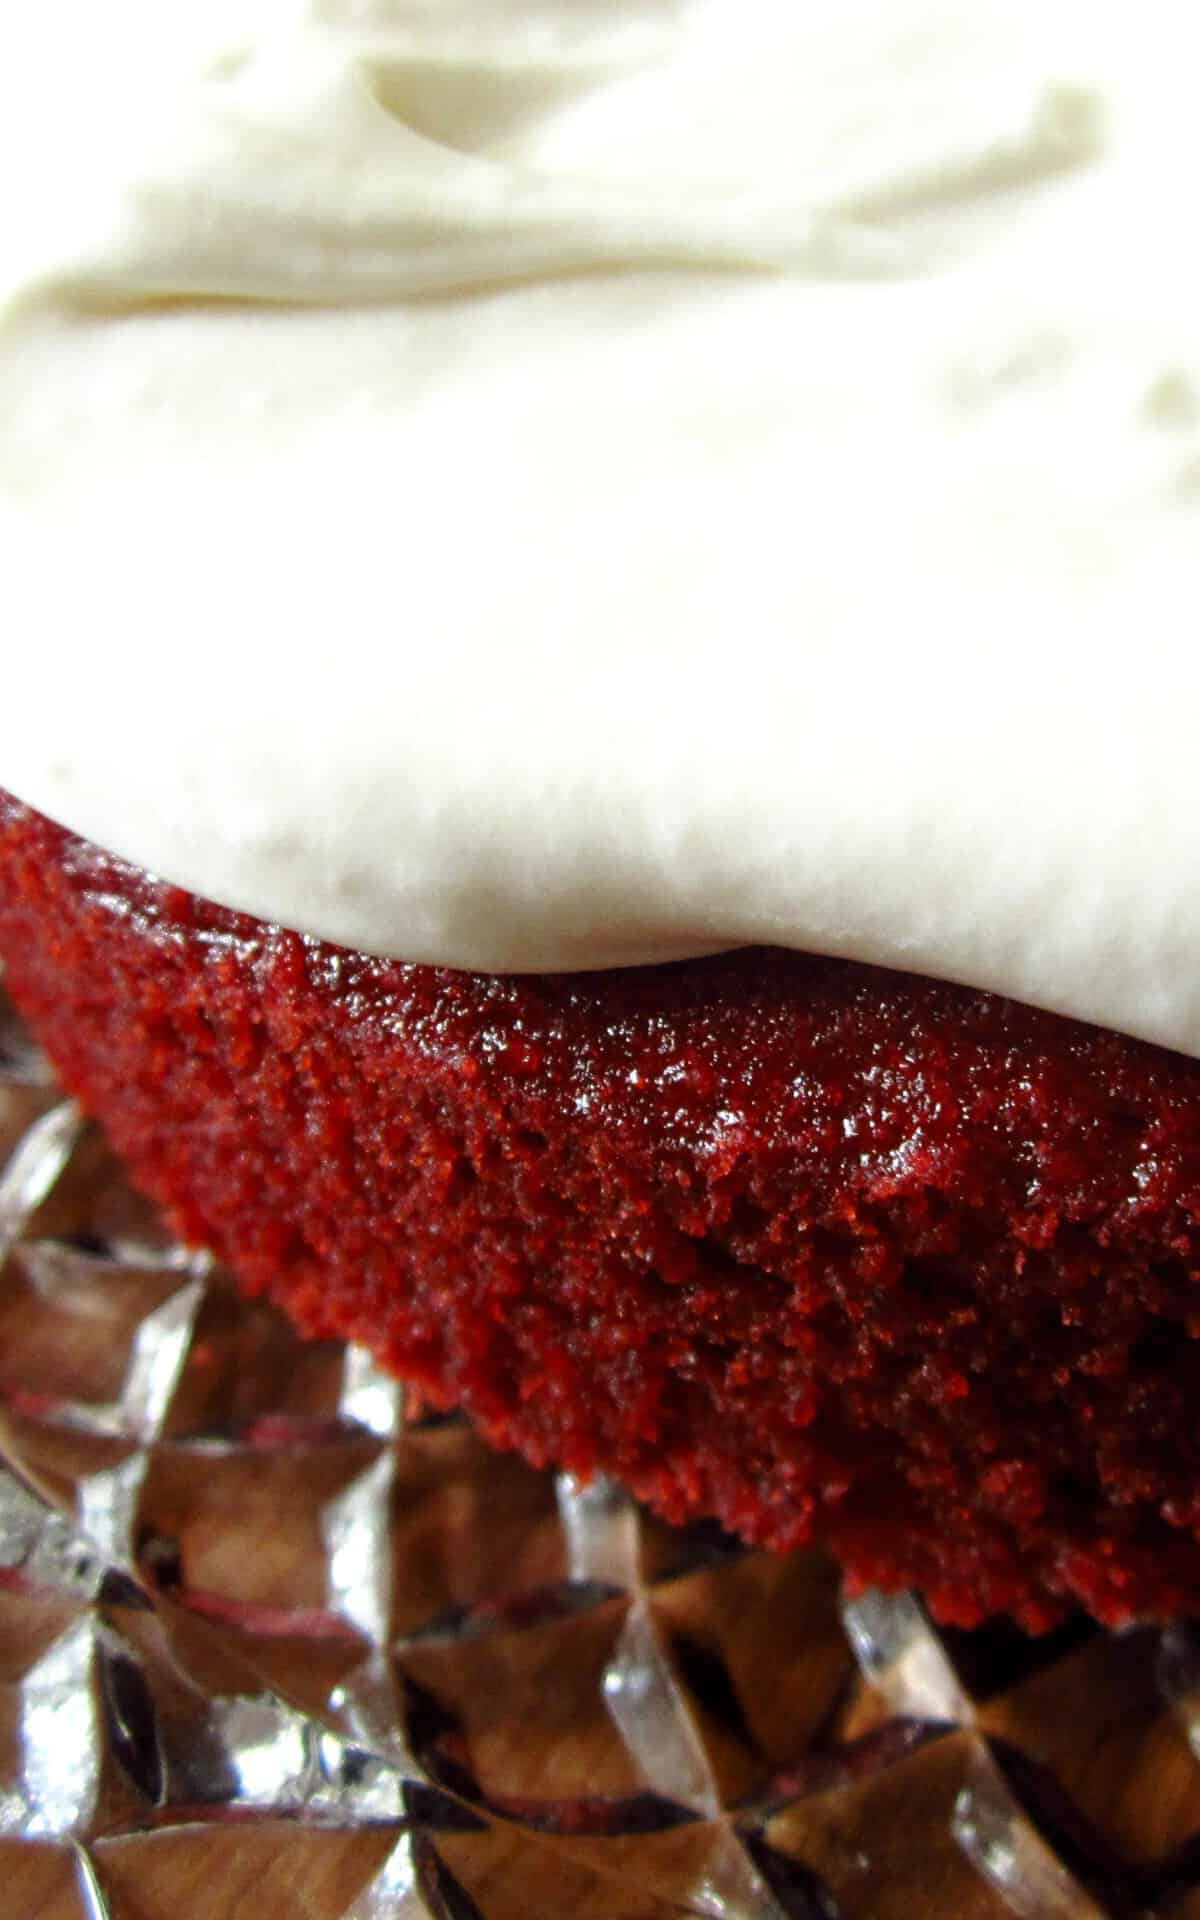  Moist and flavorful, this Red Velvet Cake is a delight for the senses